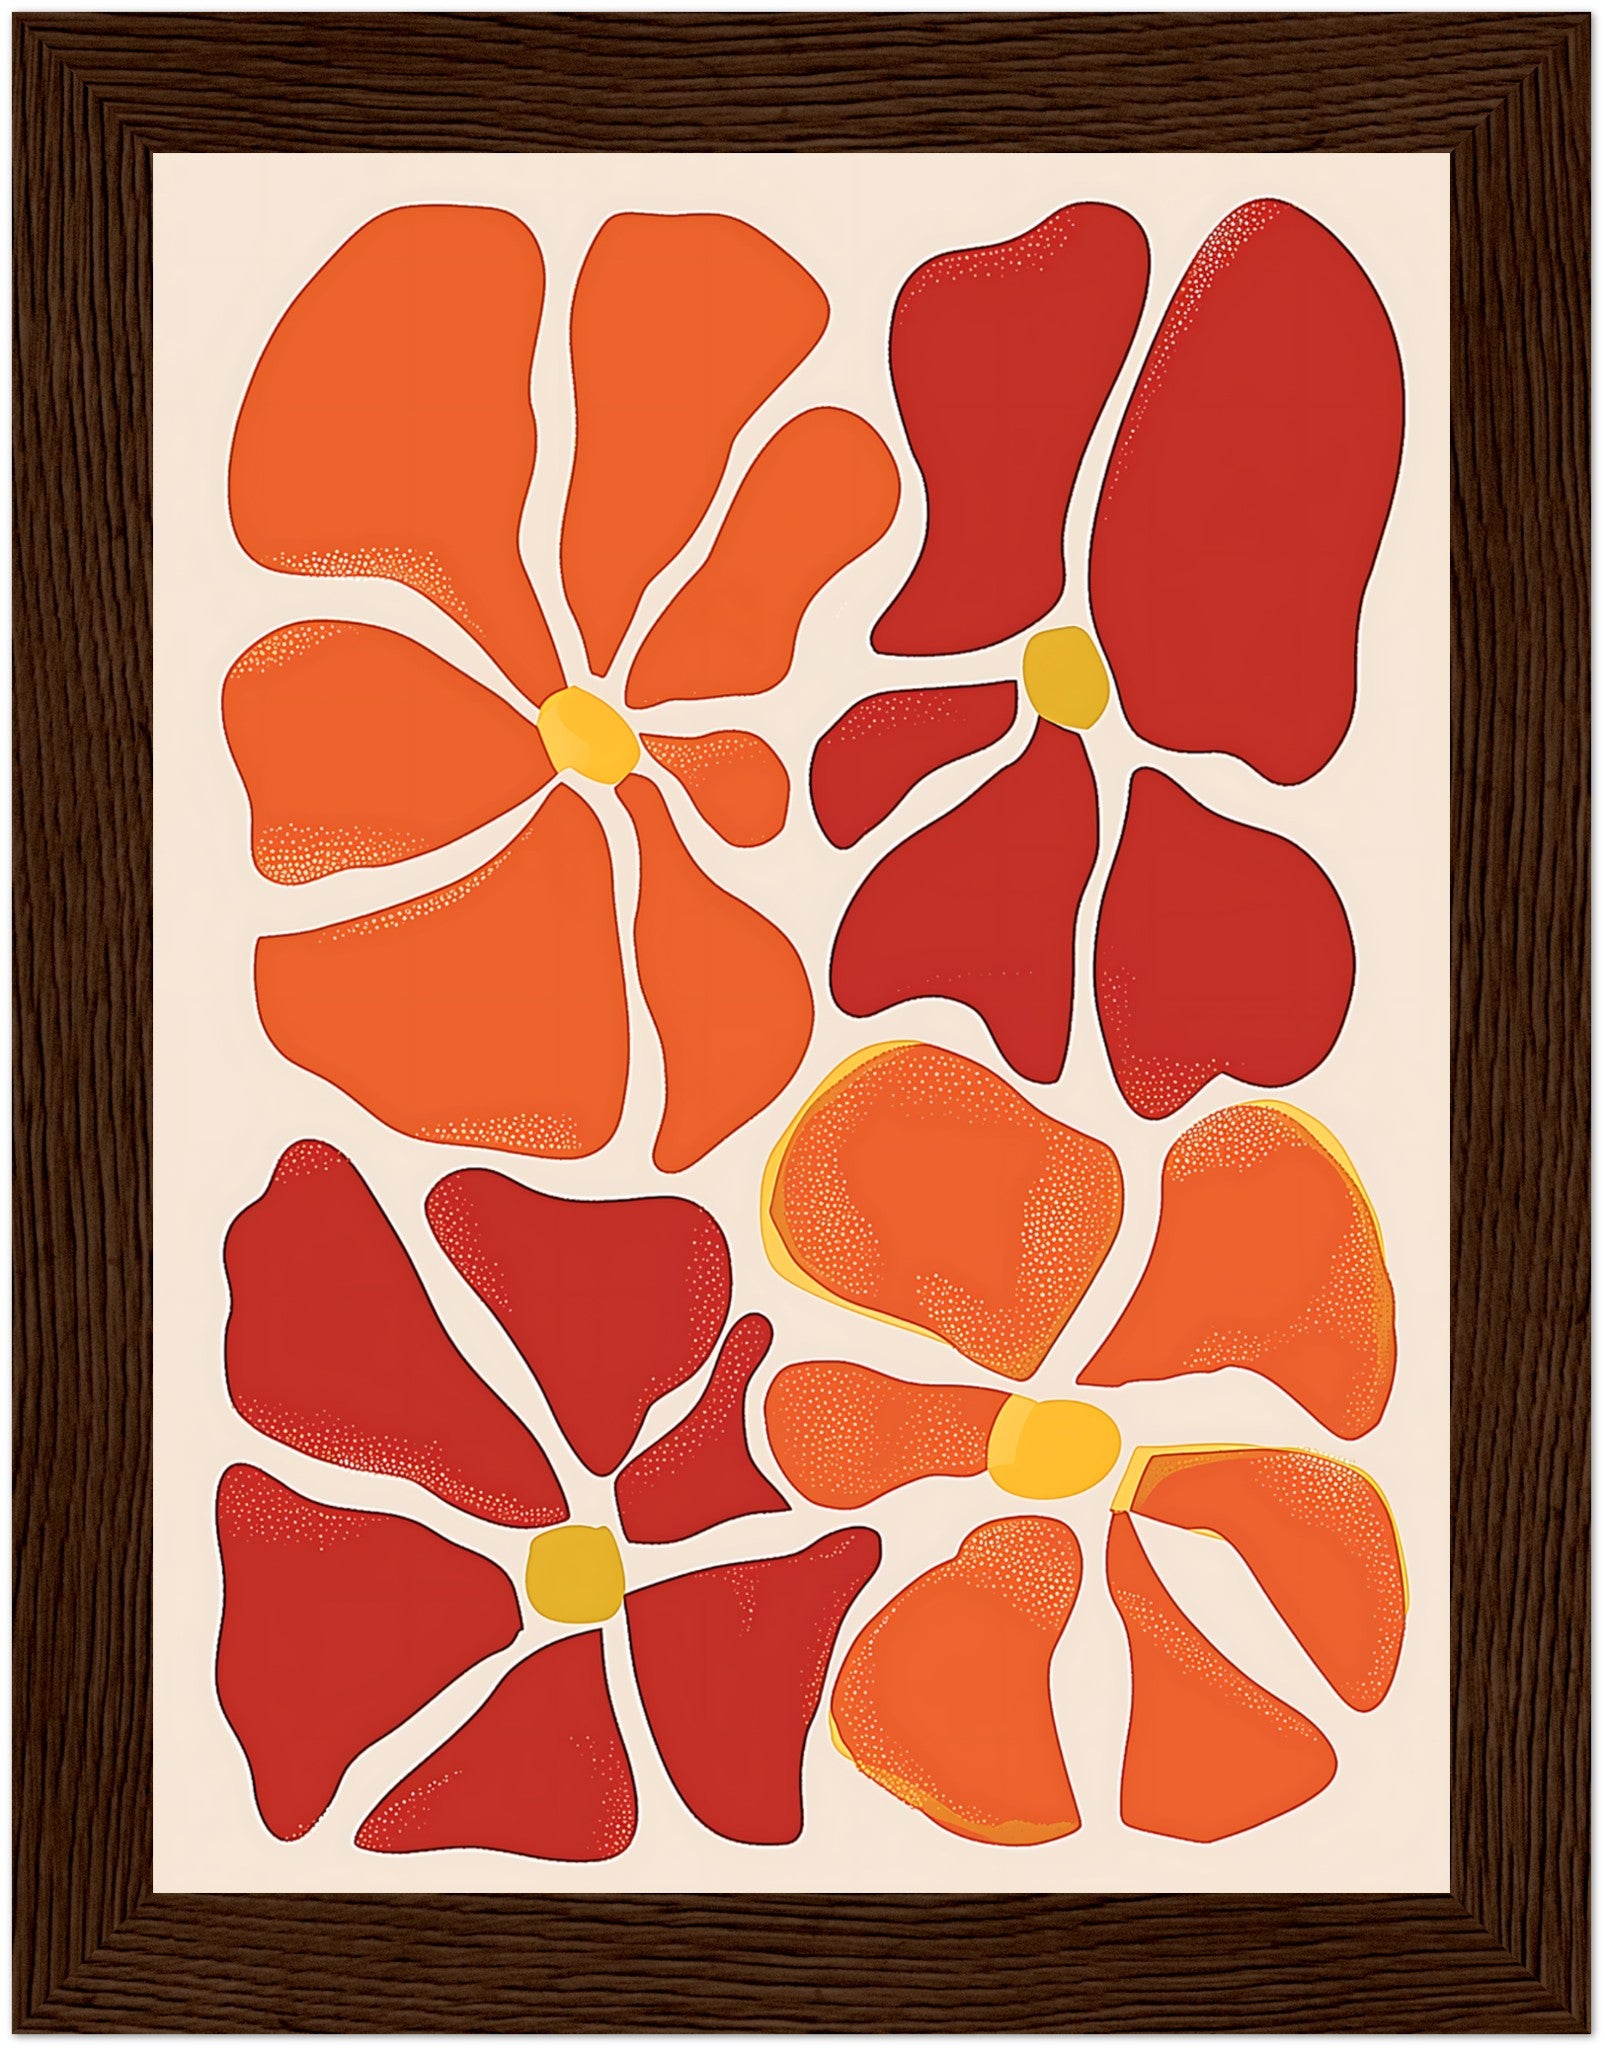 Abstract artwork with a pattern of red and orange flower-like shapes on a light background, framed.